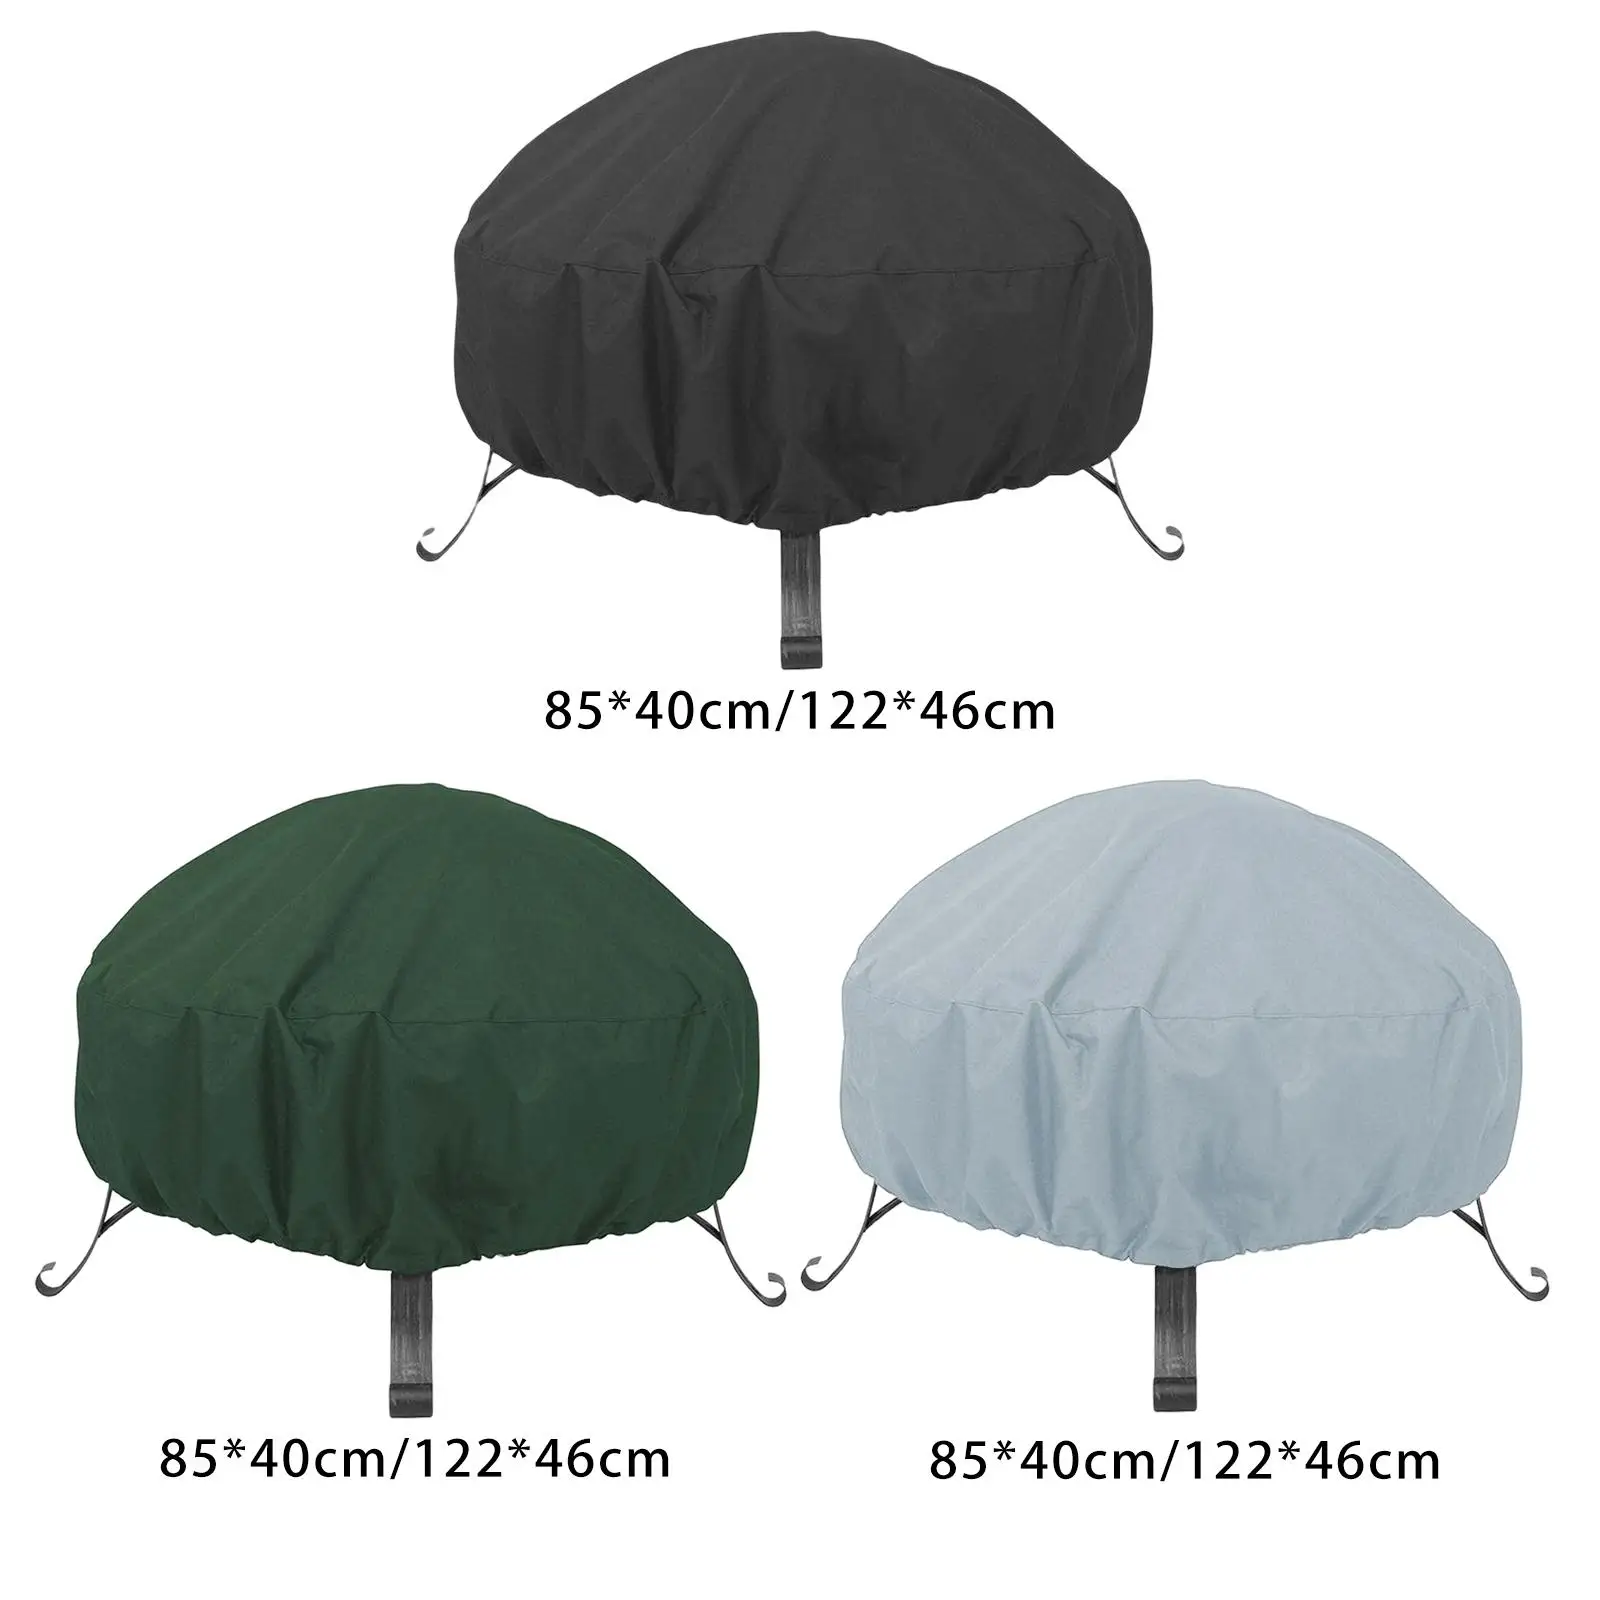 Breathable Outdoors Fire Pit Cover Oxford Cloth Waterproof BBQ Cover Outdoor Garden Brazier Cover for Indoor Outside Barbecue